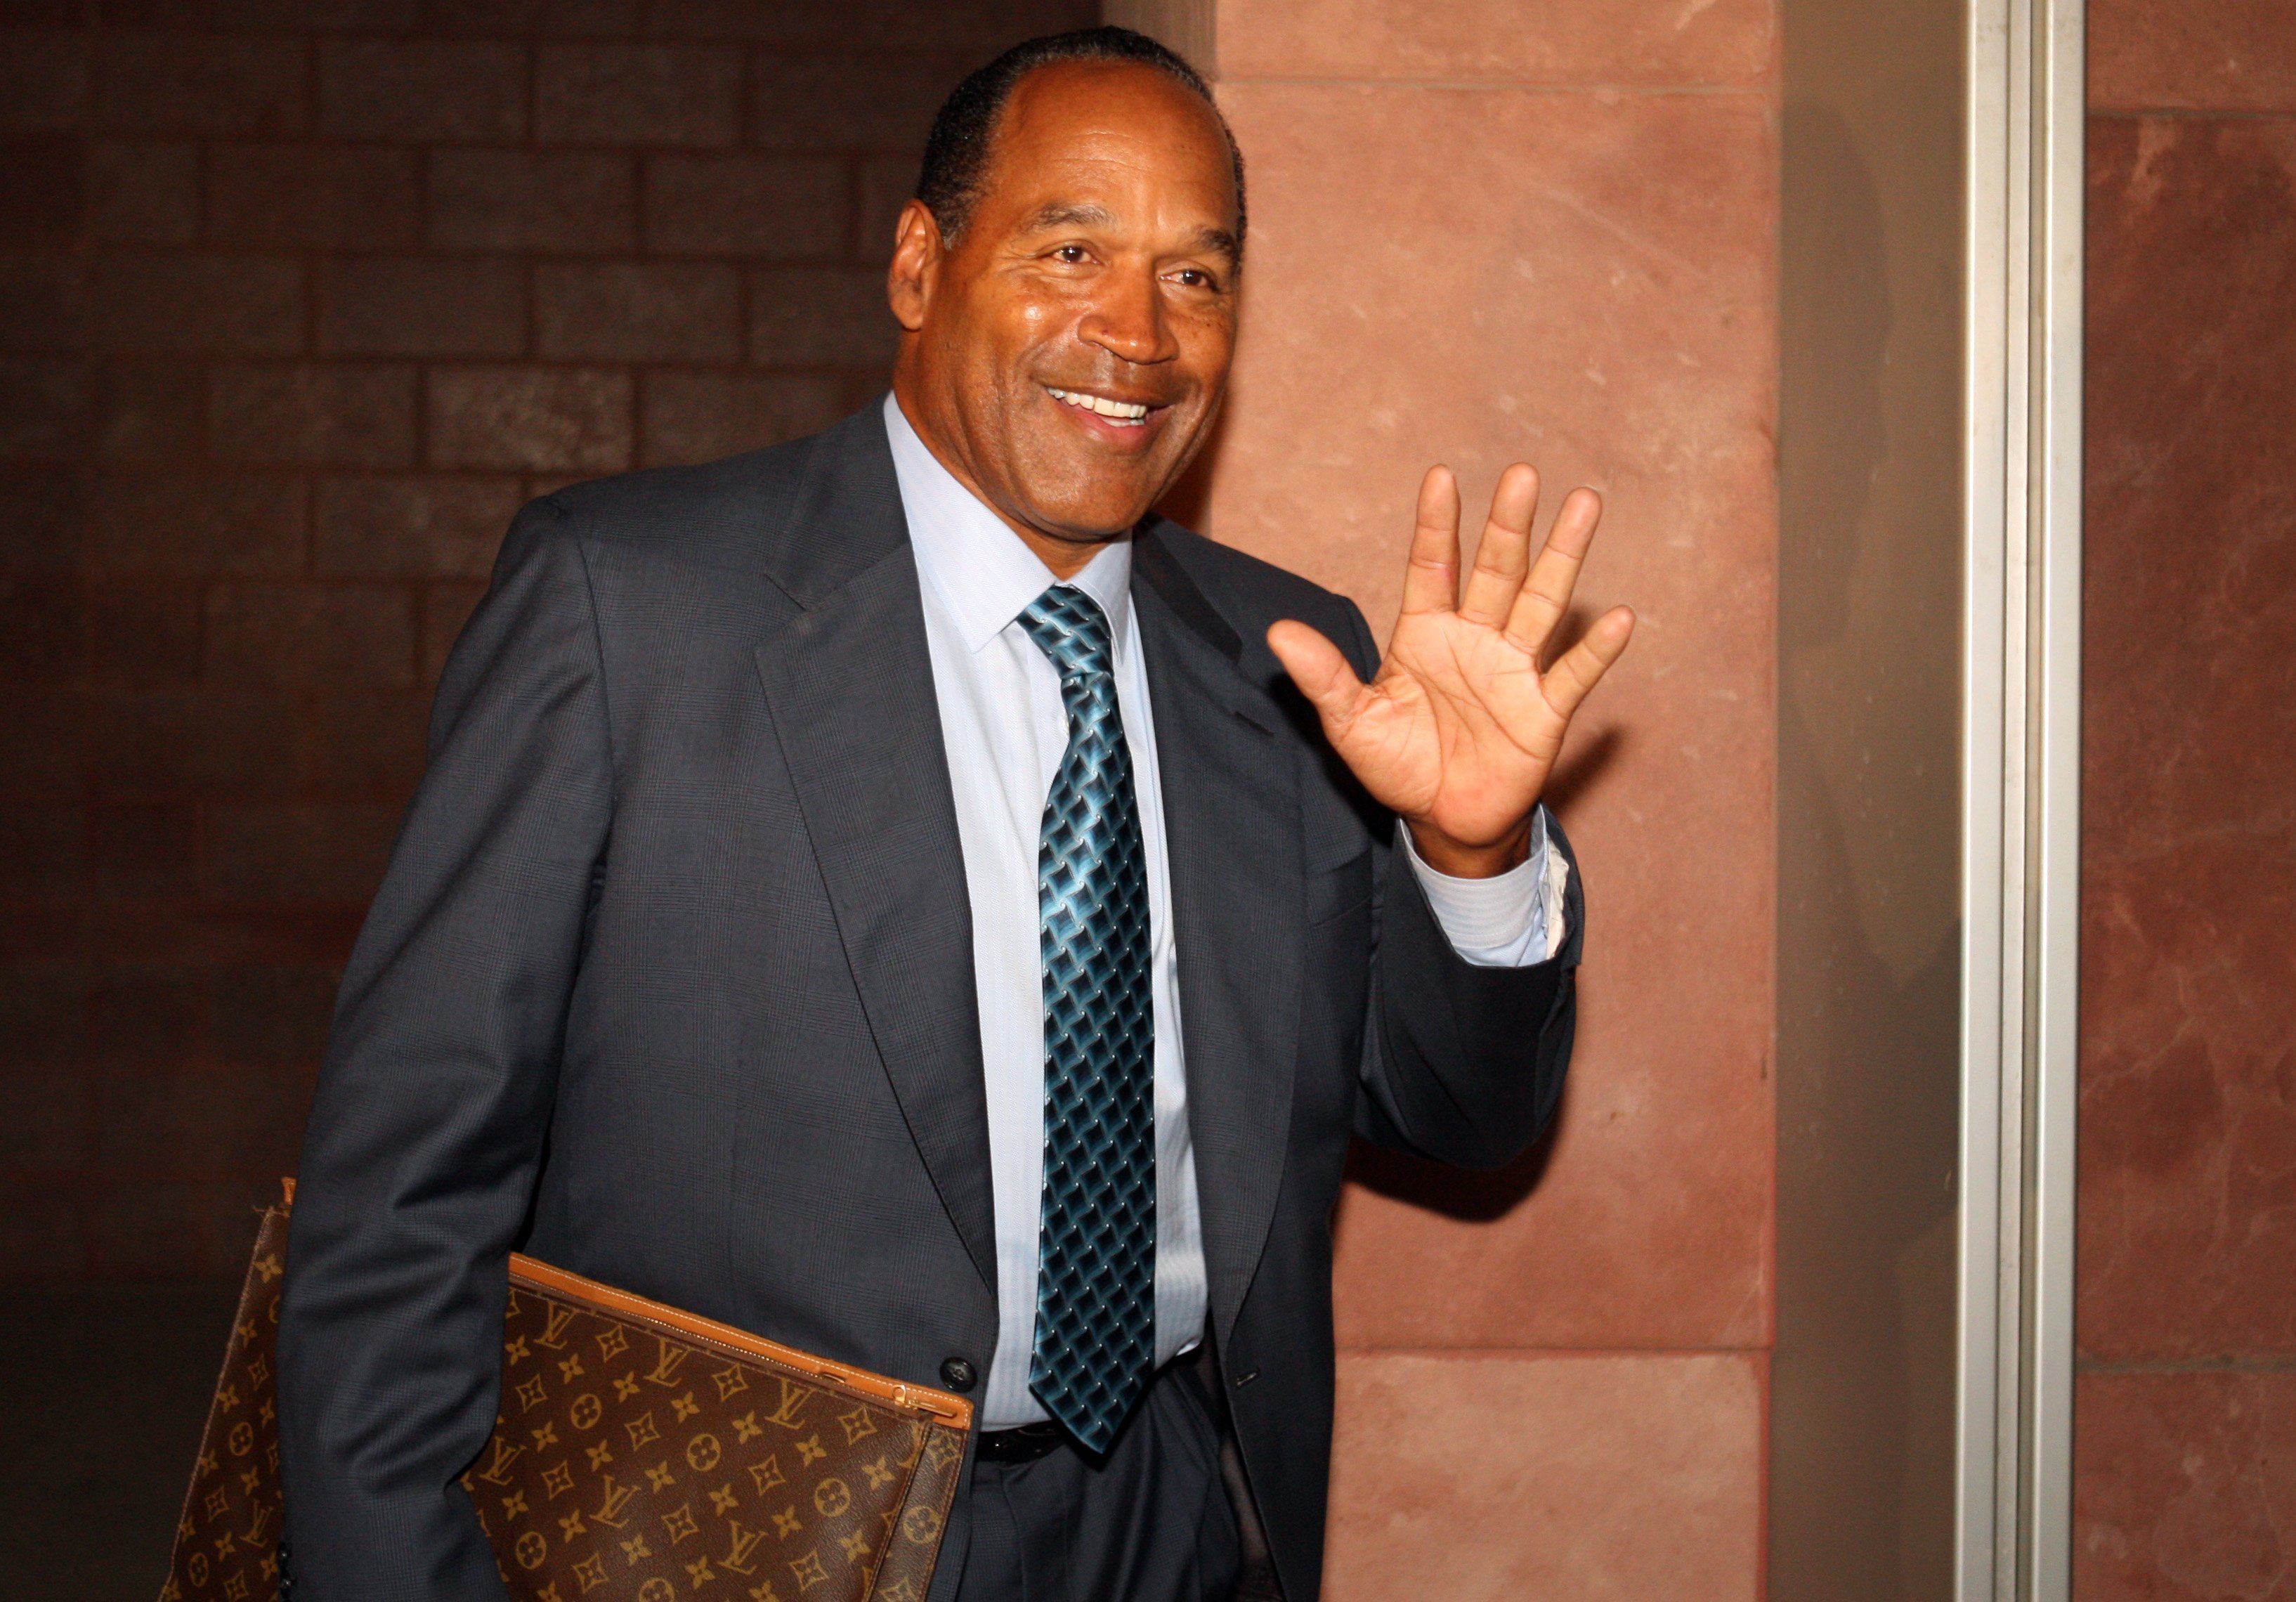 OJ Simpson after the closing arguments of his trial for armed robbery in October 2008. | Photo: Getty Images